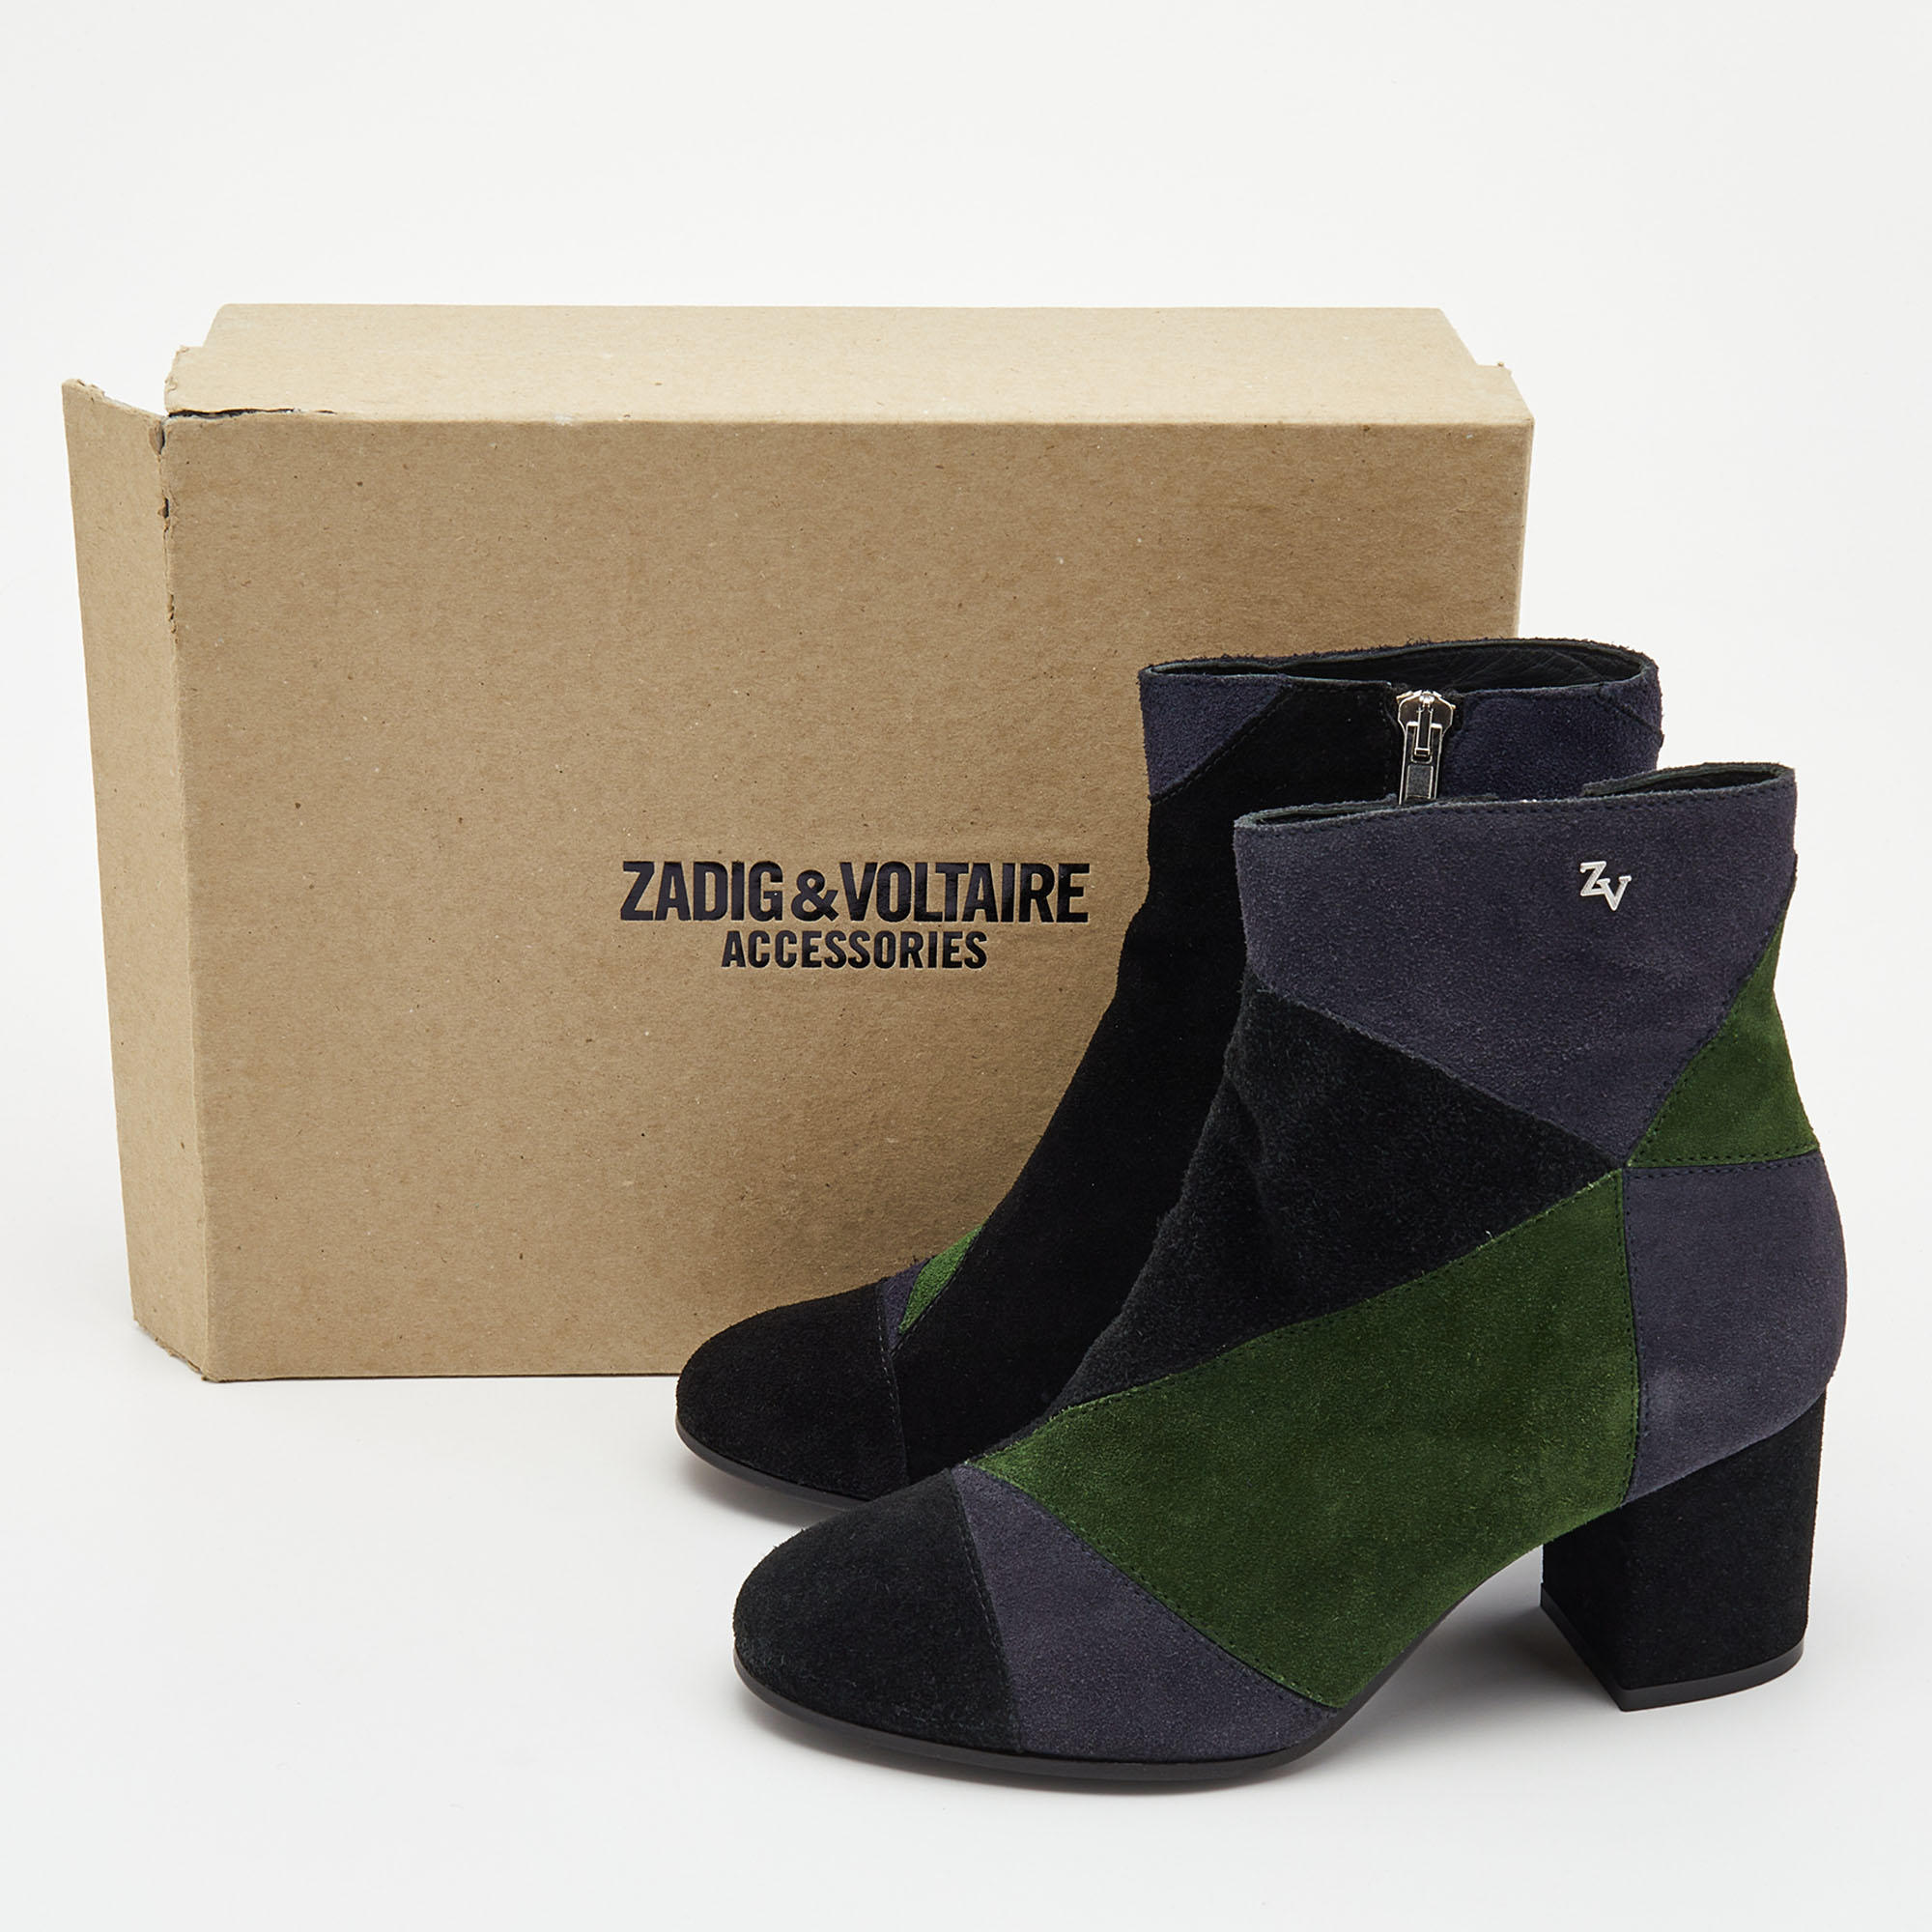 Zadig & Voltaire Tricolor Suede Ankle Length Boots Size 36